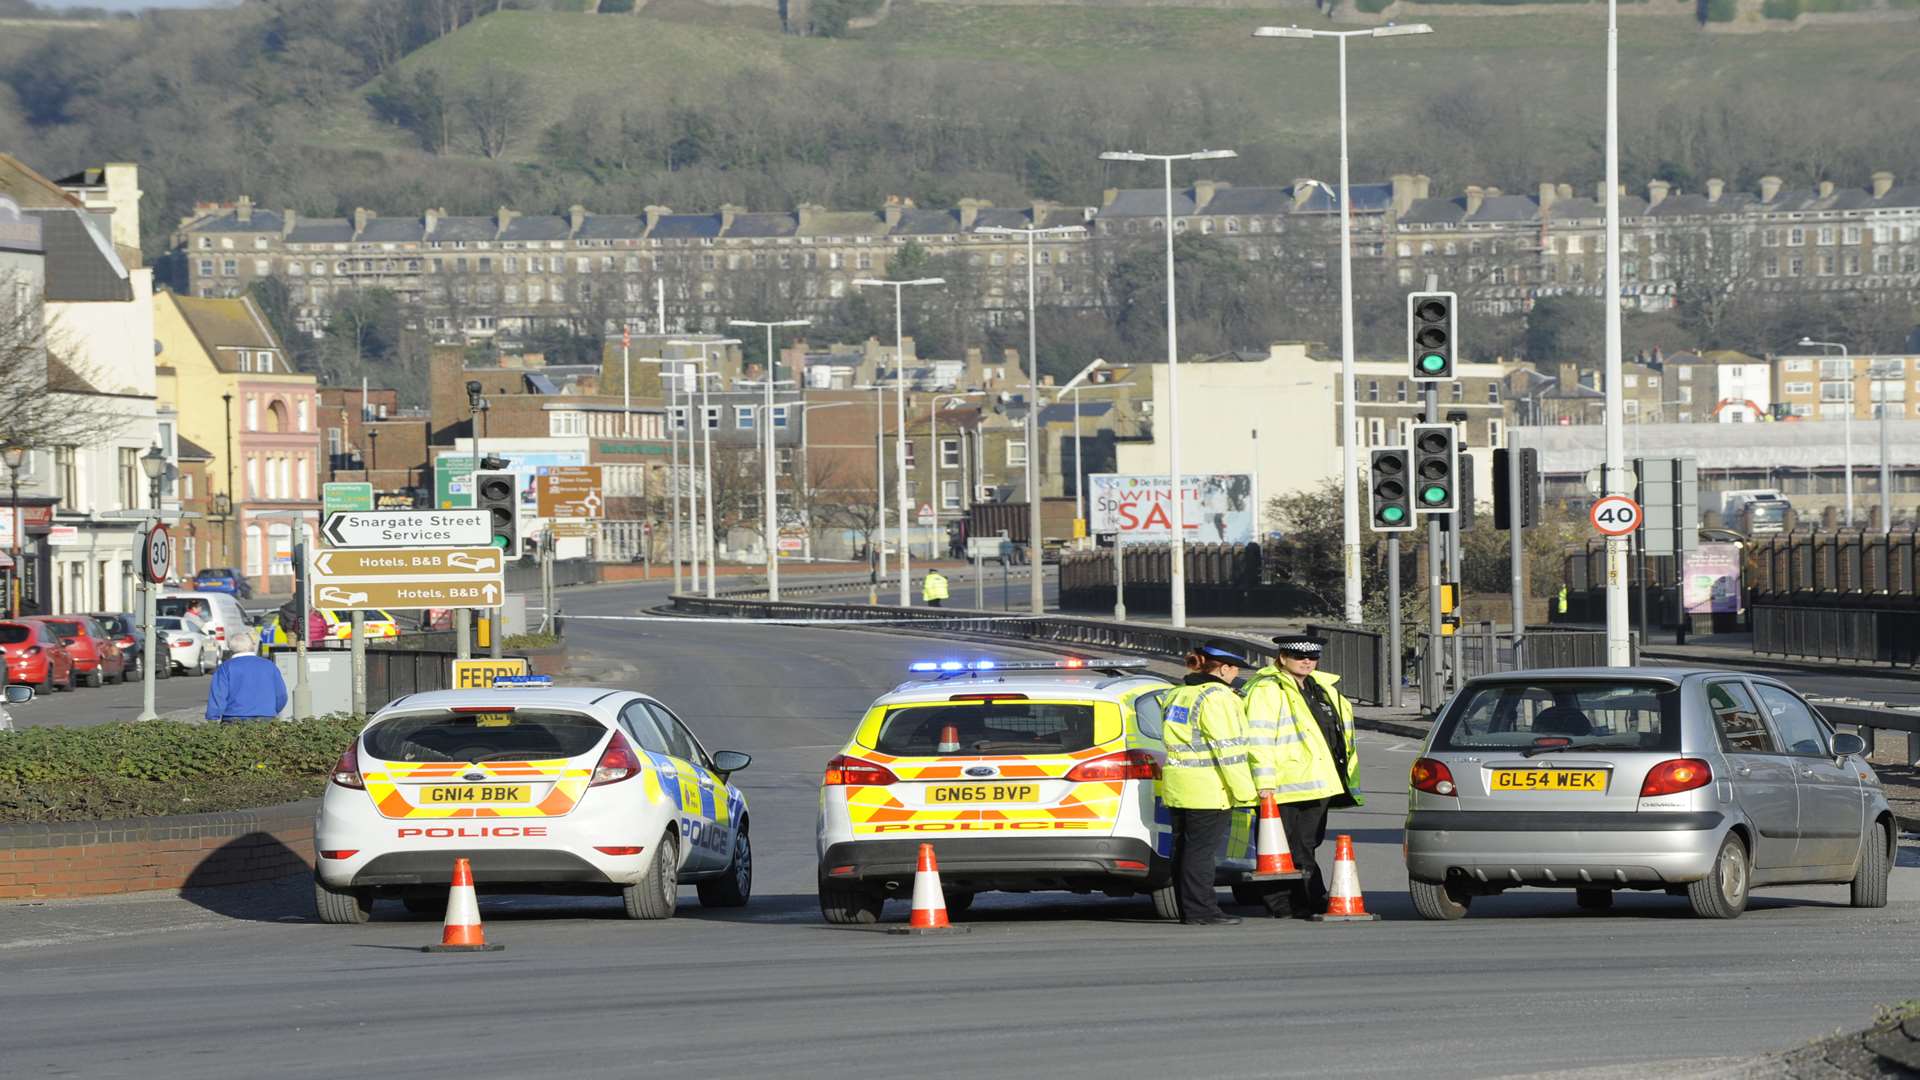 The road has been cordoned off and the police are waiting for bomb disposal teams to arrive